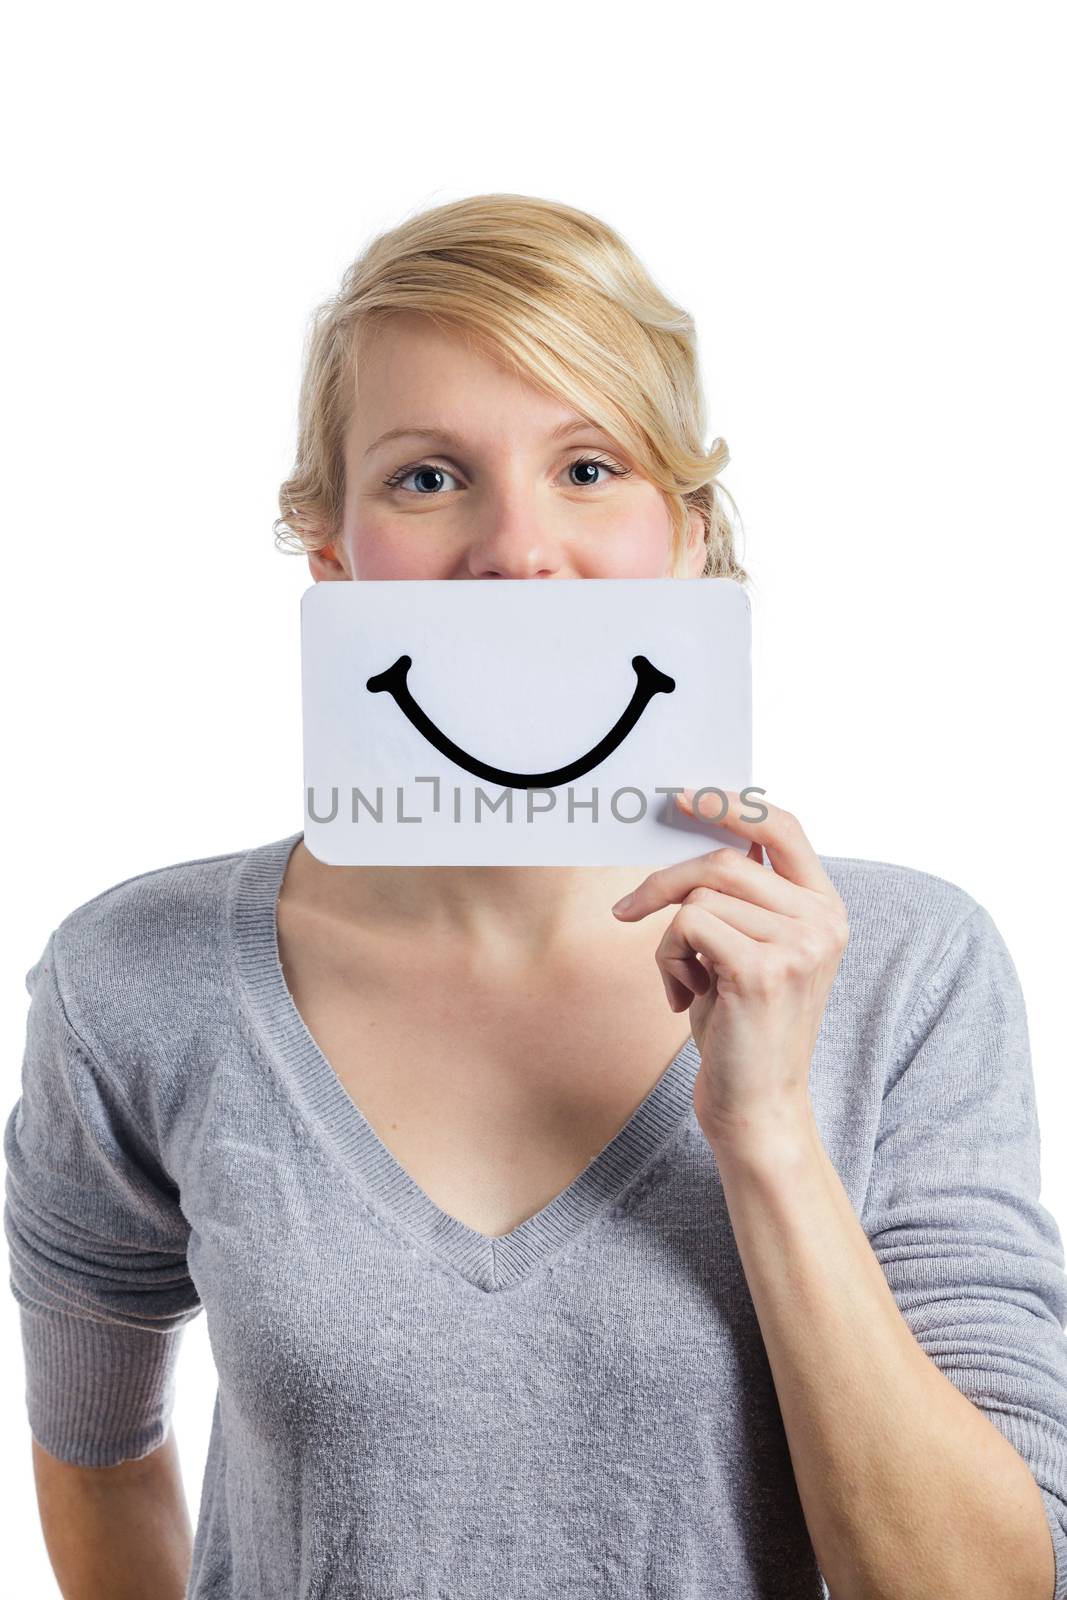 Happy Portrait of a Woman Holding a Smiling Mood Board Isolated on White Background